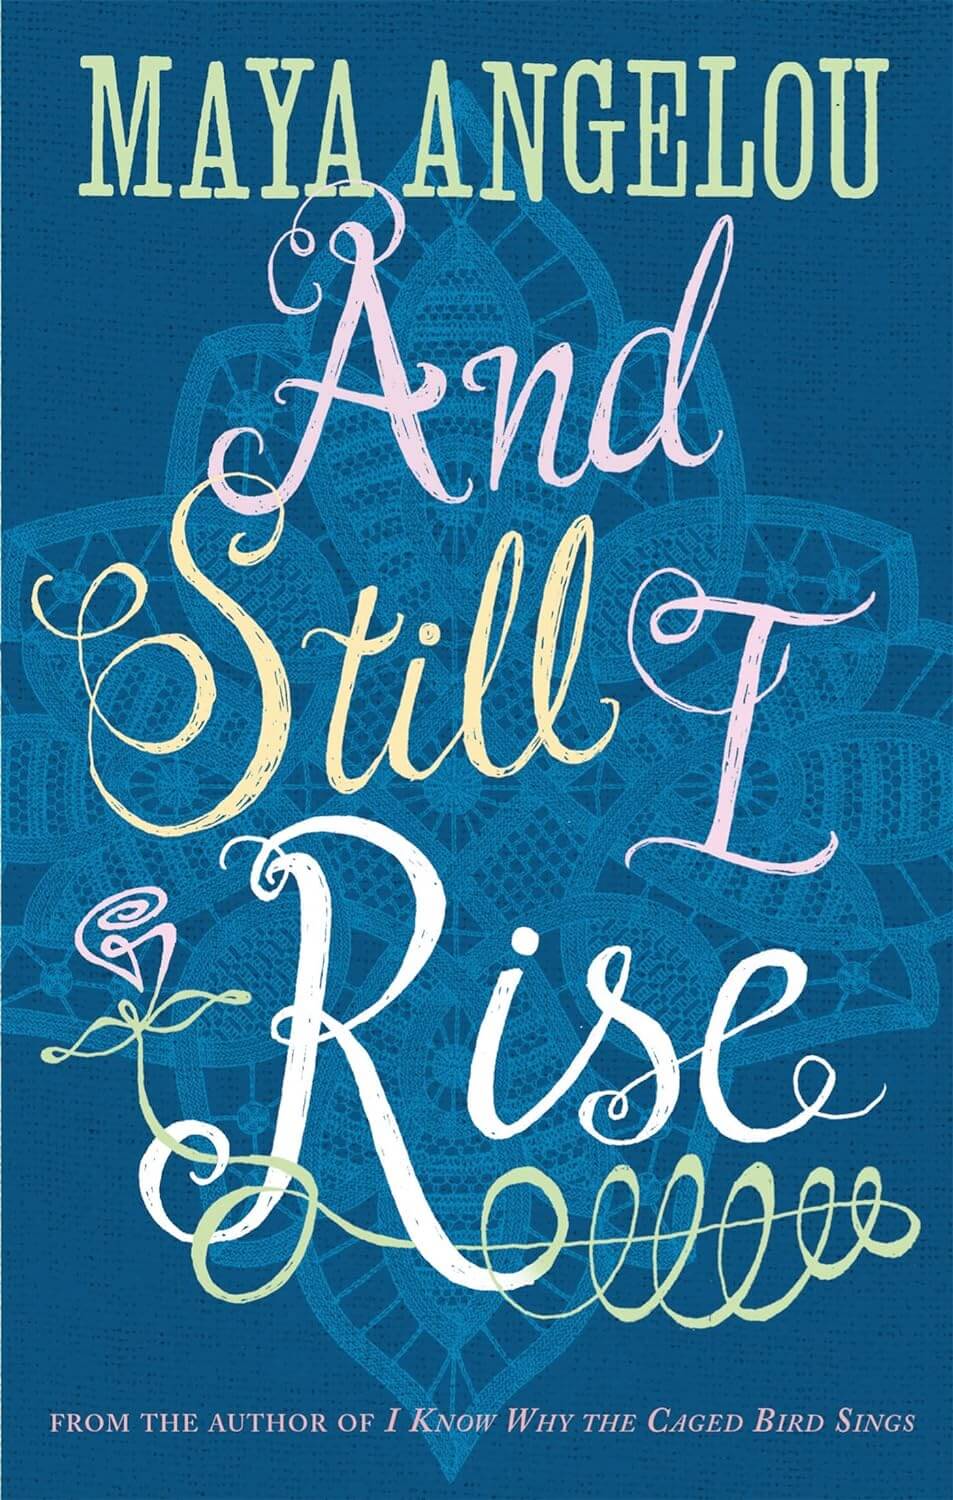 “And Still I Rise” by Maya Angelou